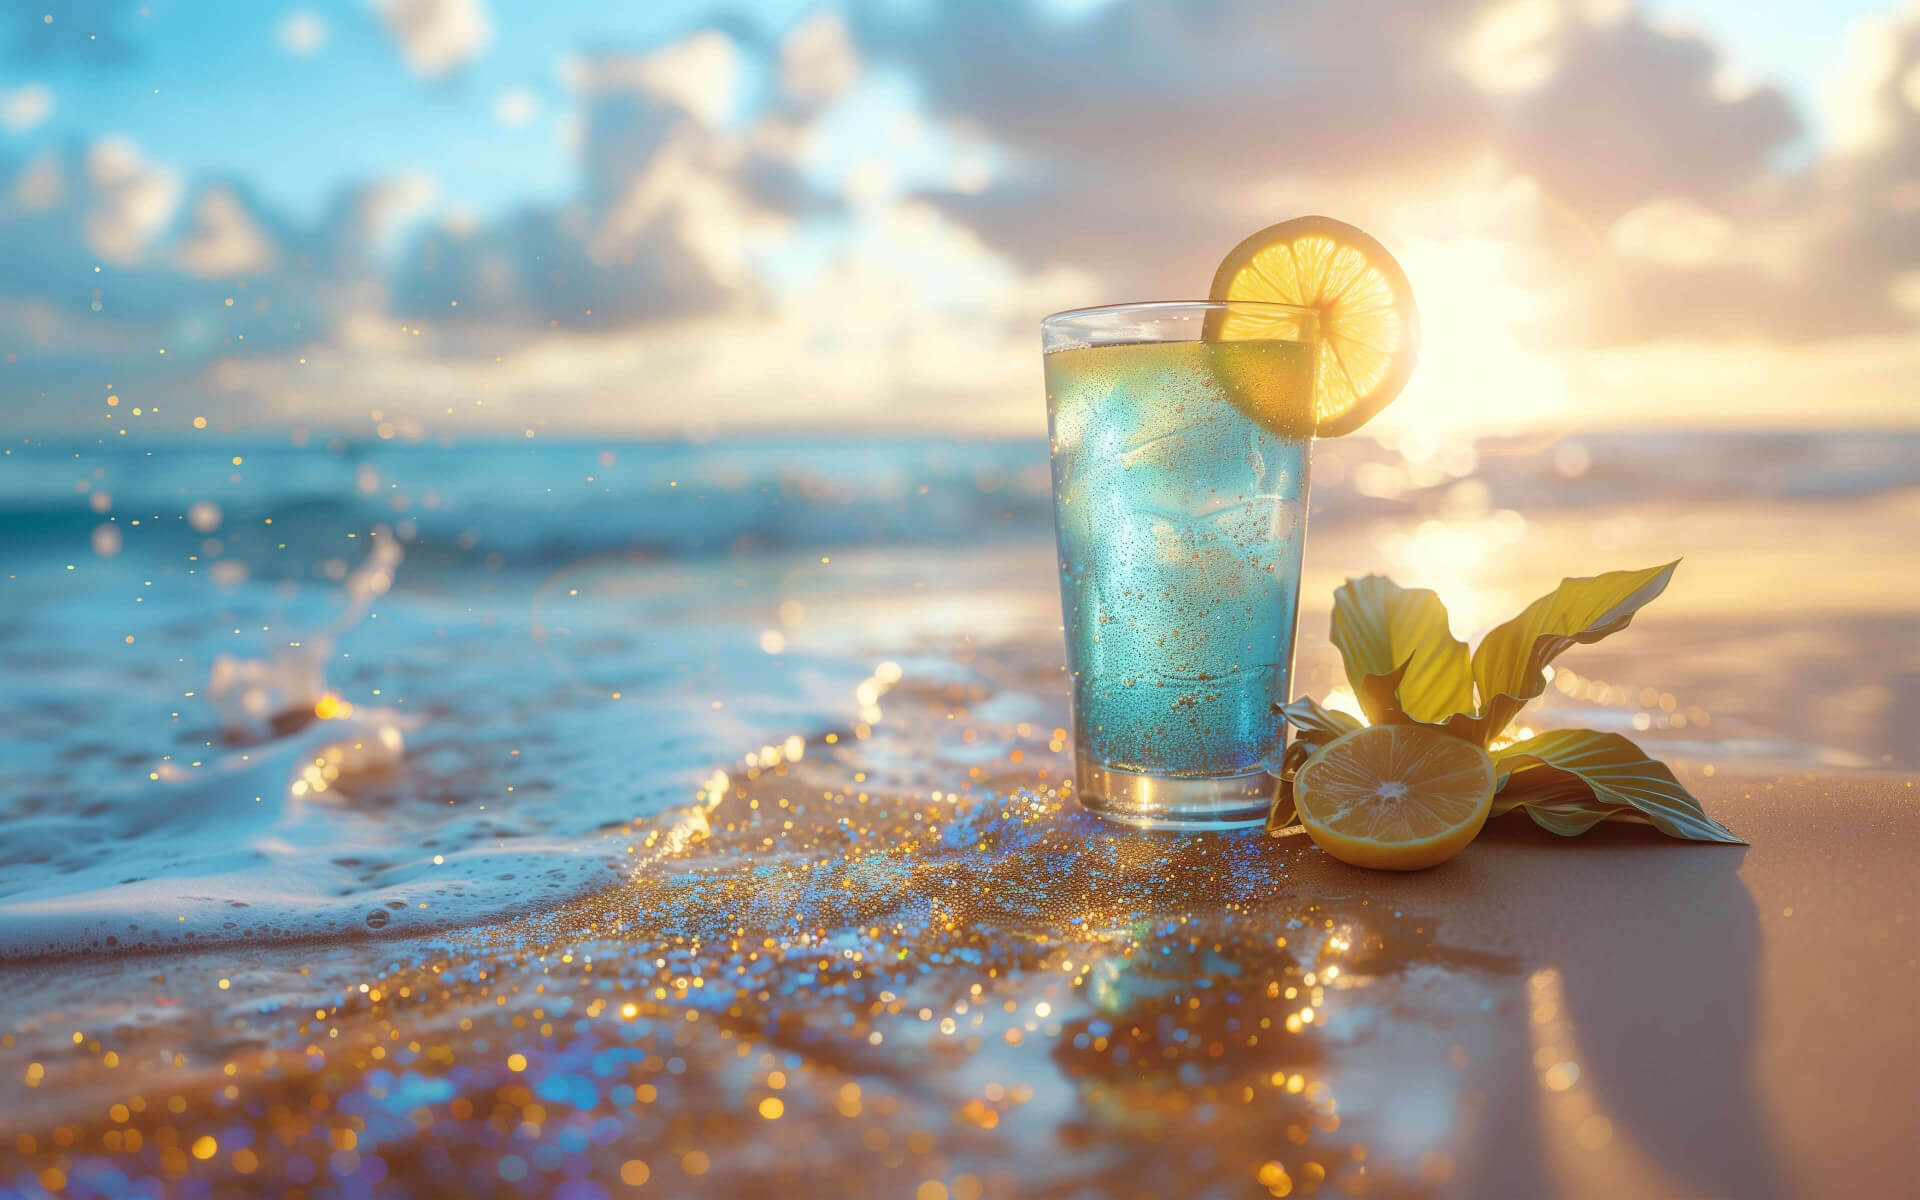 Cold drink on the ocean shore wallpaper 1440x900